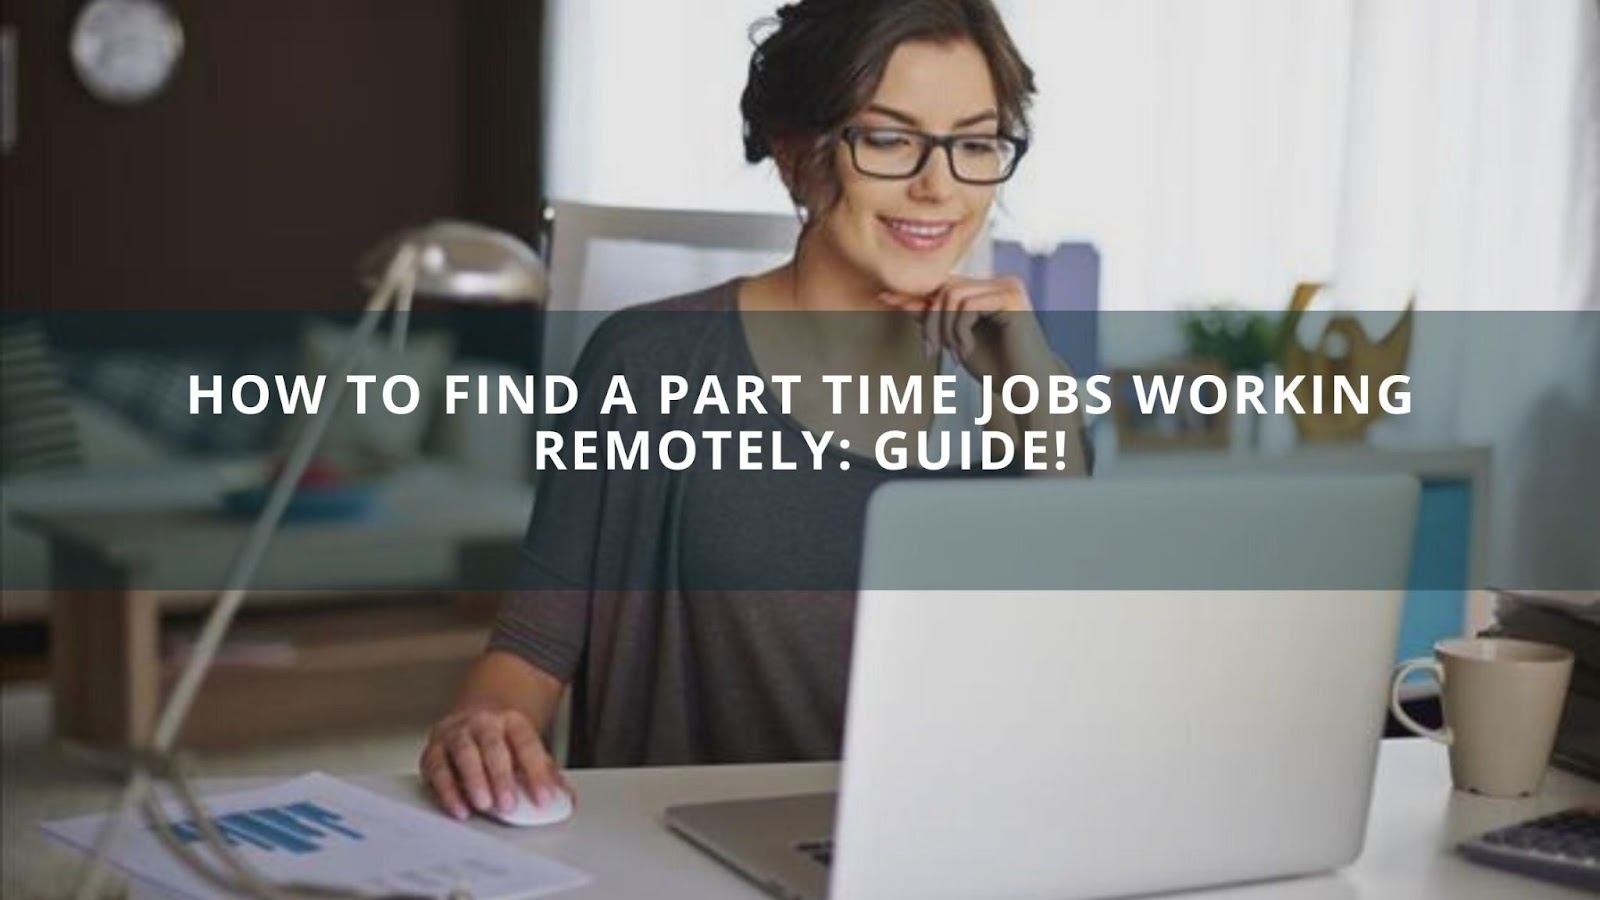 Jobs Working Remotely